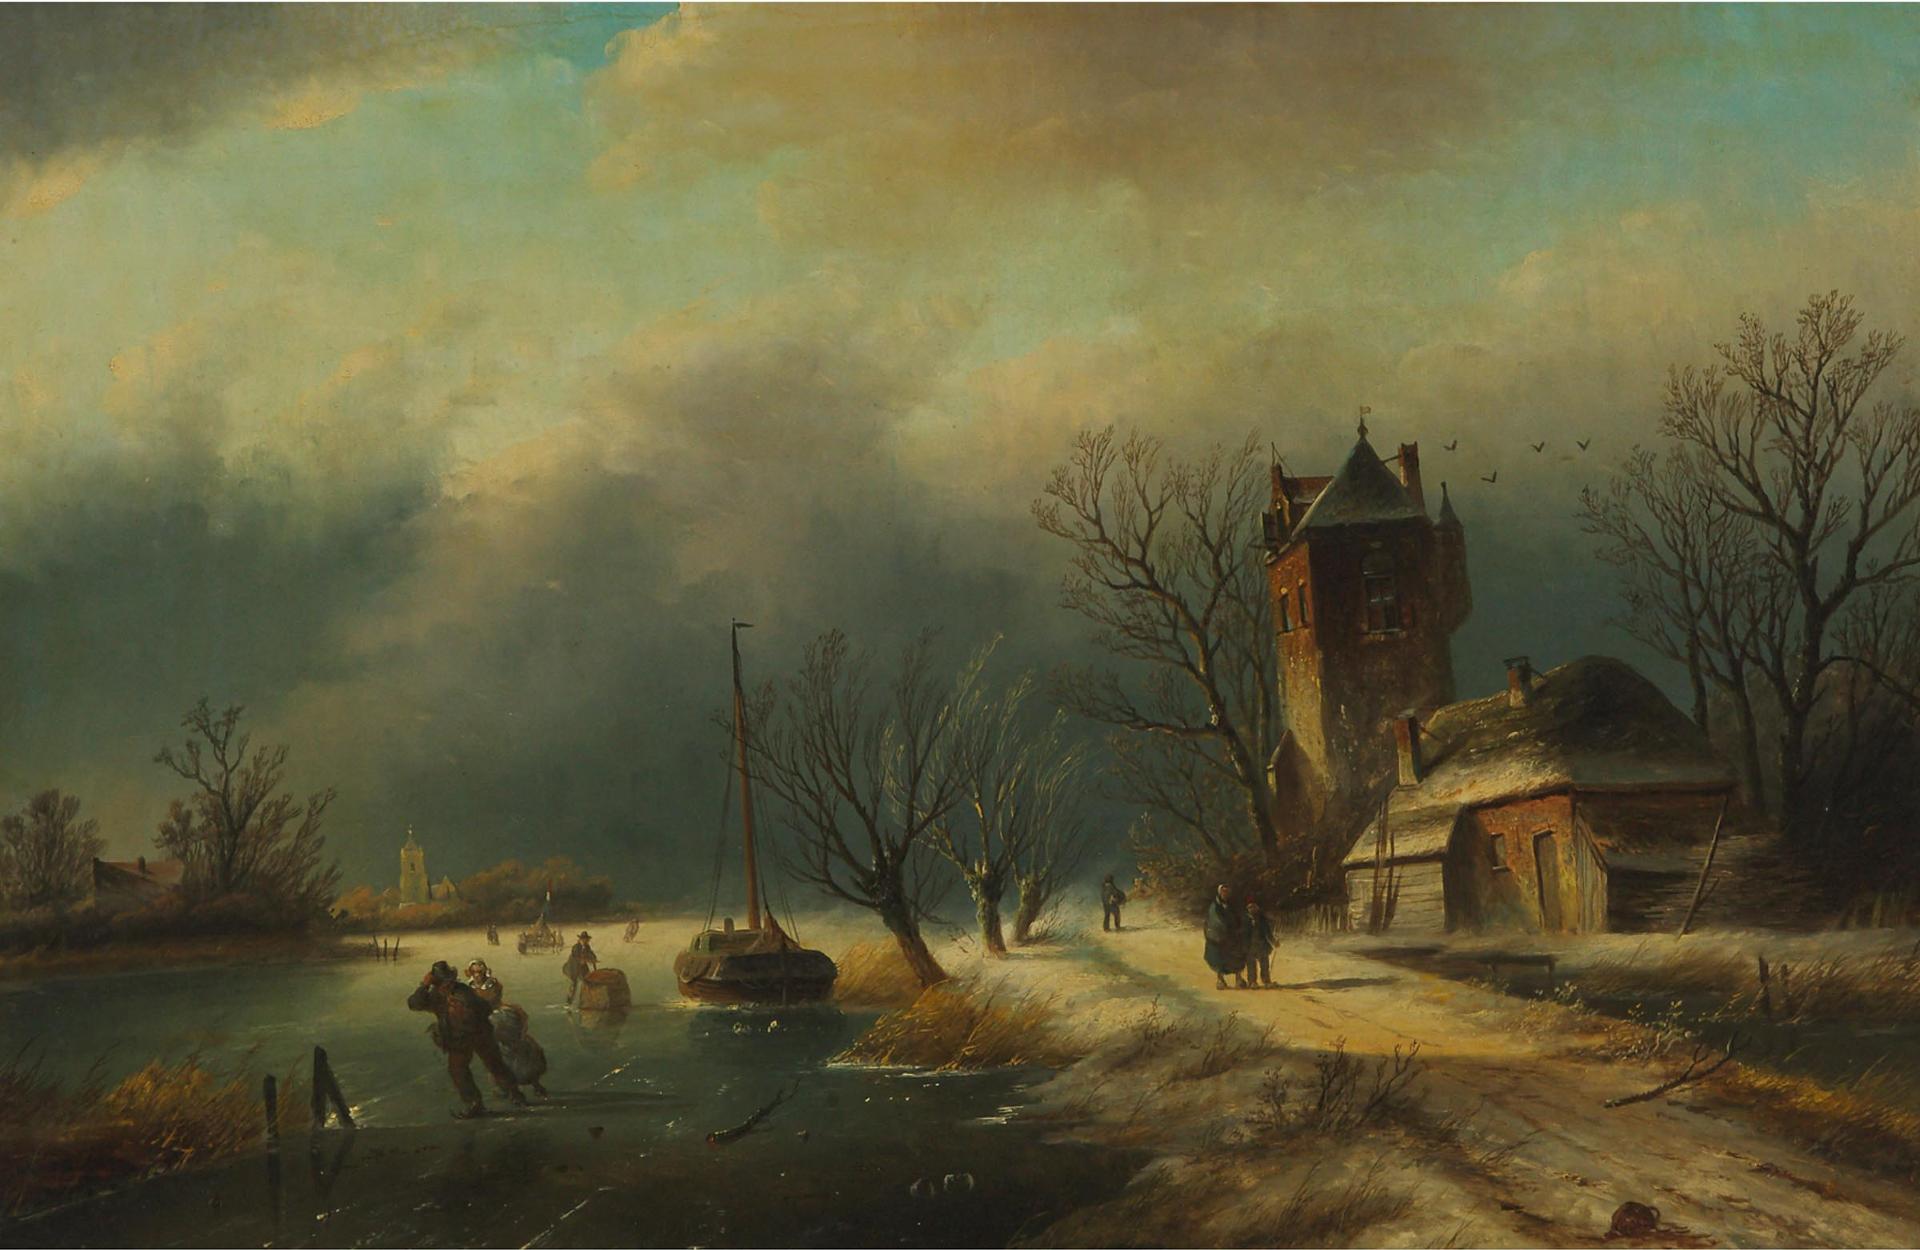 Jacob Jan Coenraad Spohler (1837-1923) - Skaters On A Frozen Pond With Figures On A Snowy Walkway